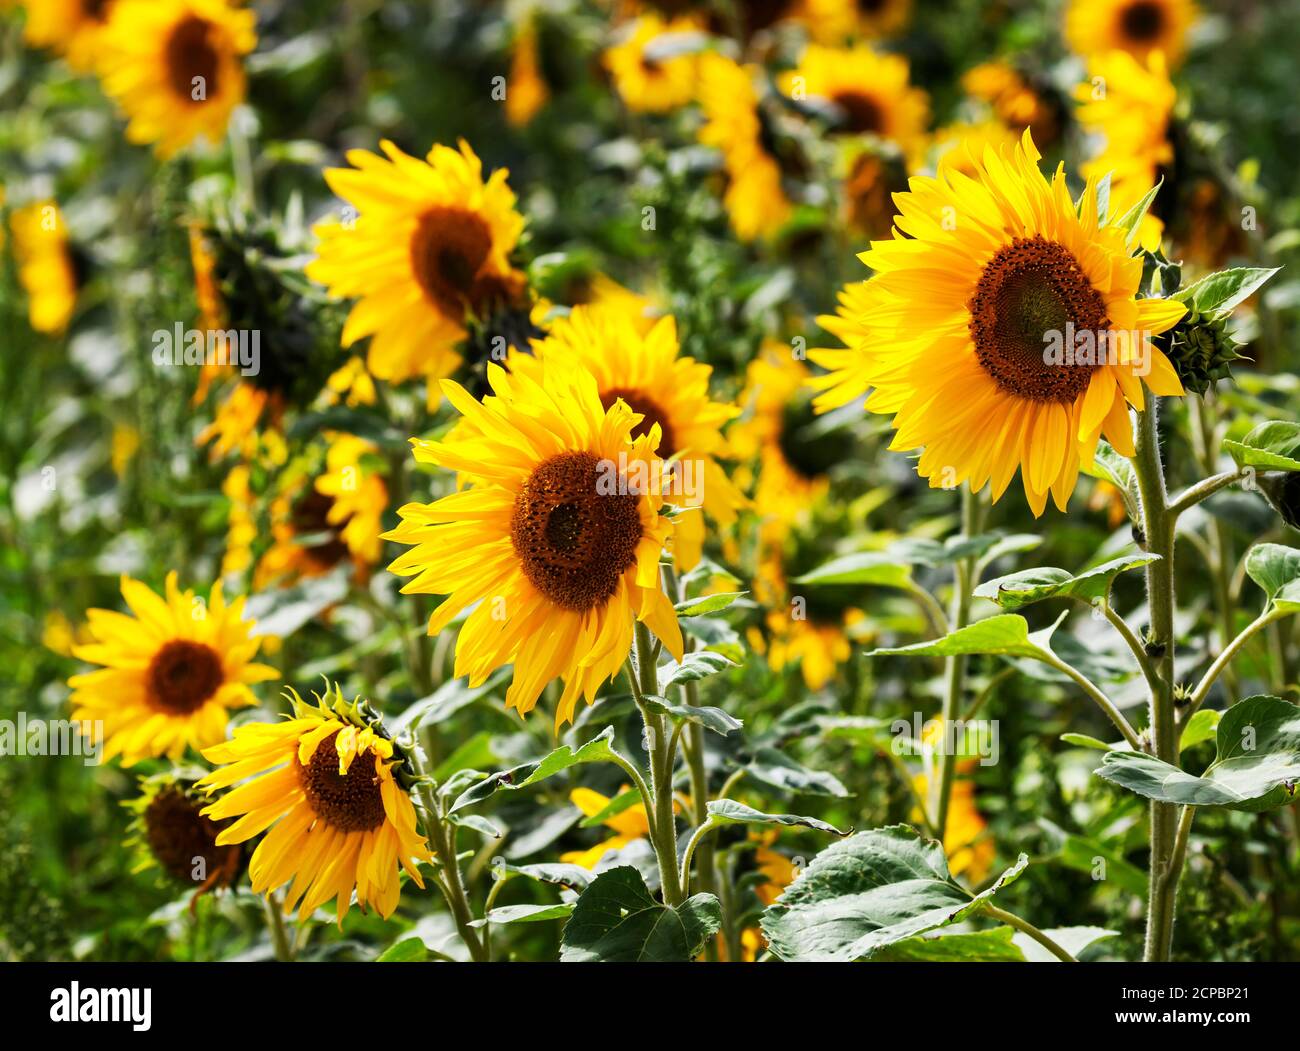 A field of sunflowers. Stock Photo